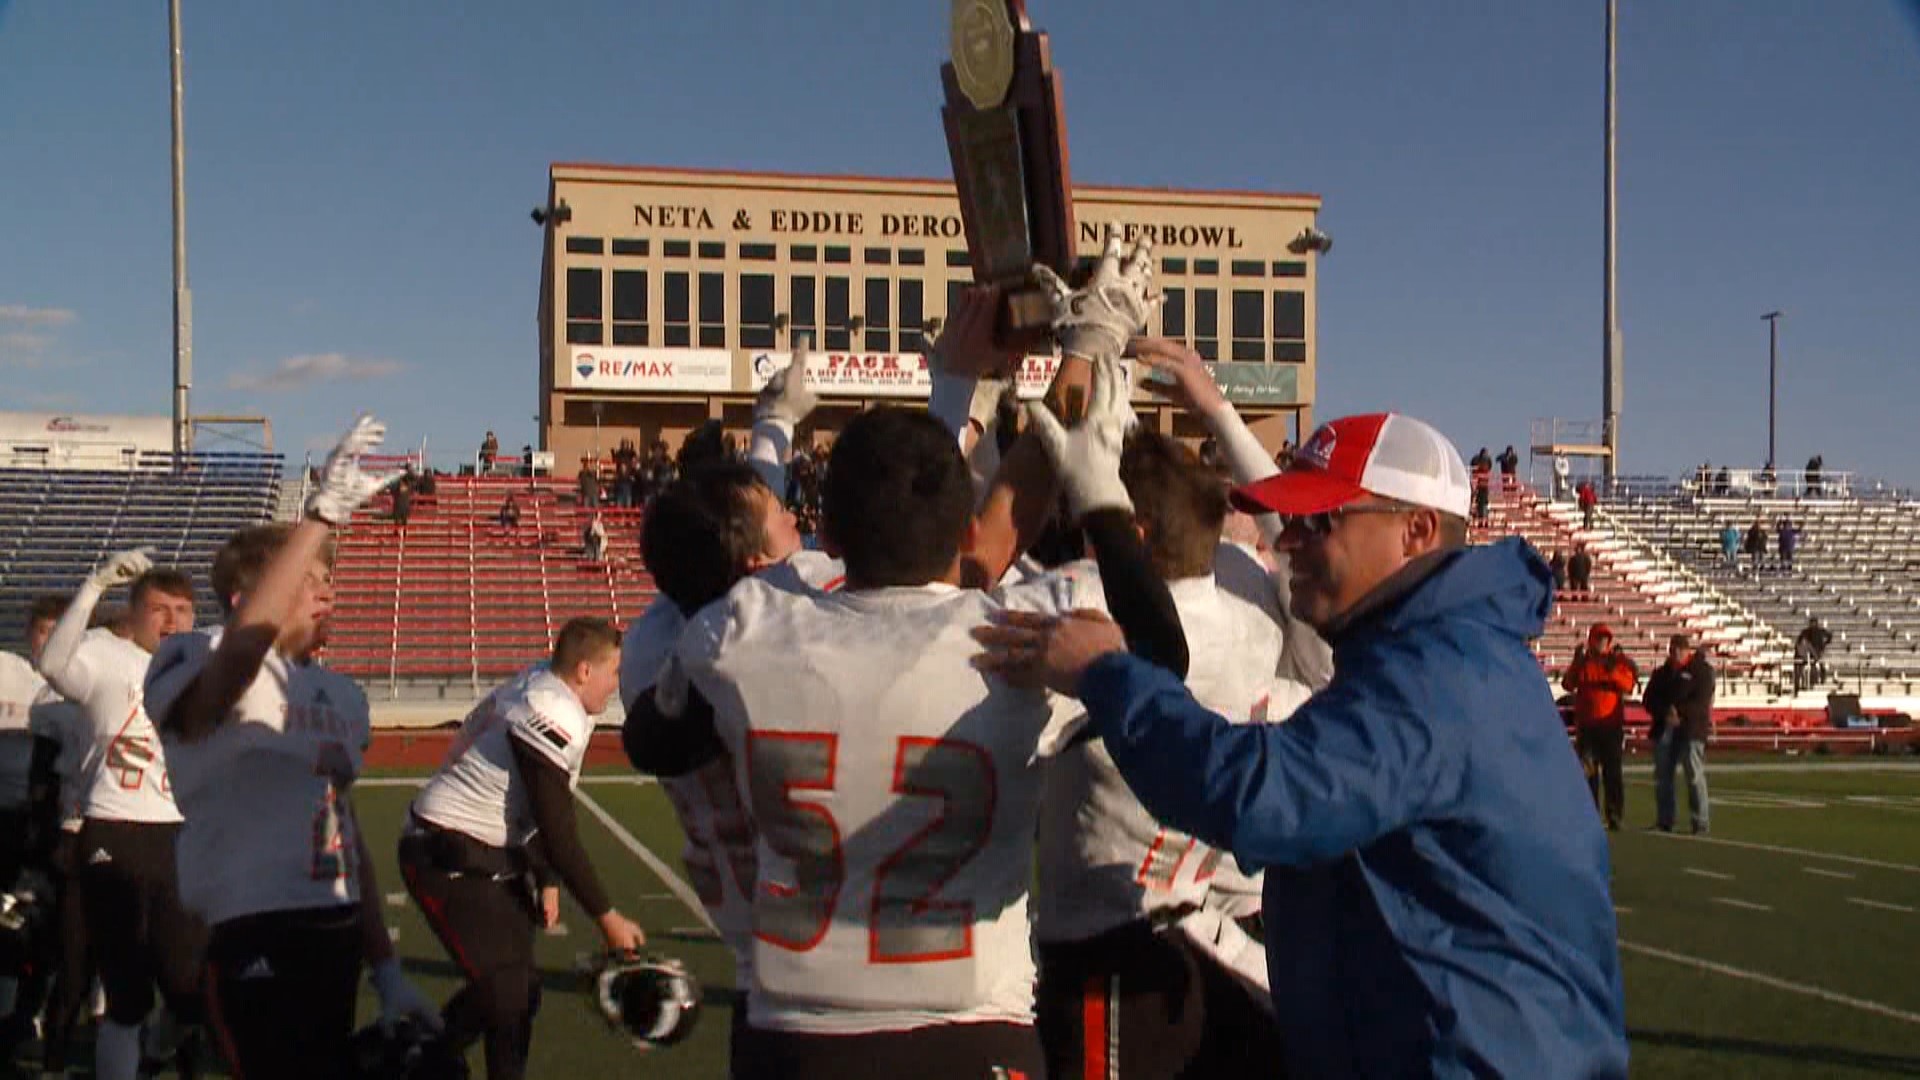 The Sterling Tigers won their first state championship last fall, capturing the Class 2A crown.